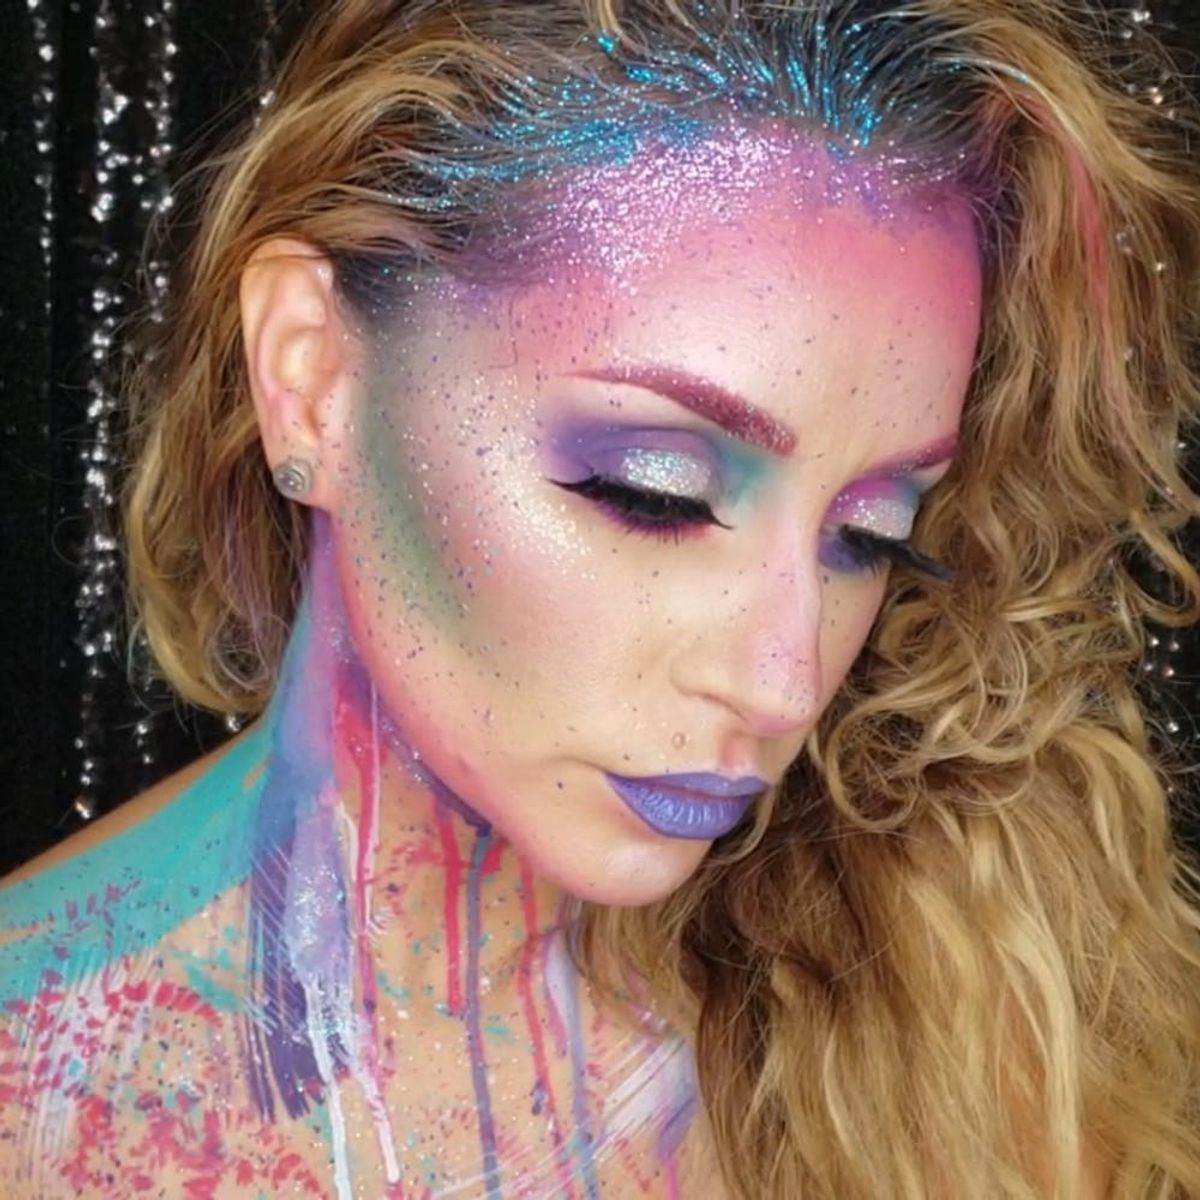 Follow This Unicorn Makeup Tutorial Just in Time for Halloween